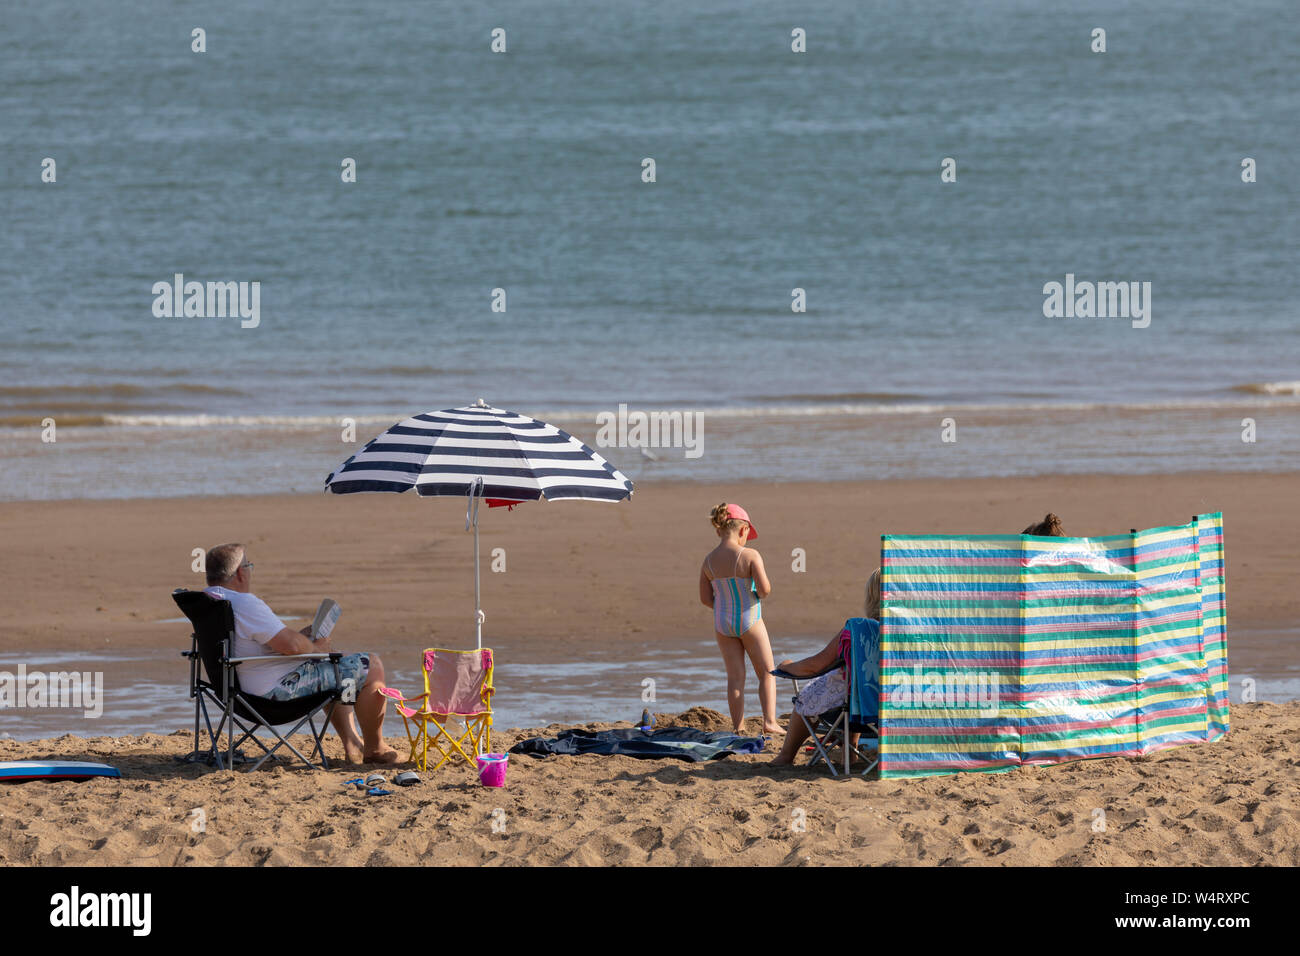 North Wales, UK. 25th July, 2019. UK Weather: Heatwave weather could break UK all time records today for some parts of the UK with temperatures expected to reach the 39C for the south east with many parts above 30C. The North Wales coastline bathed in hot sunshine as the heatwave reaches its peak today as a beach visitors enjoy the weather on Cowlyn Bay Beach, North Wales. Credit: DGDImages/Alamy Live News Stock Photo